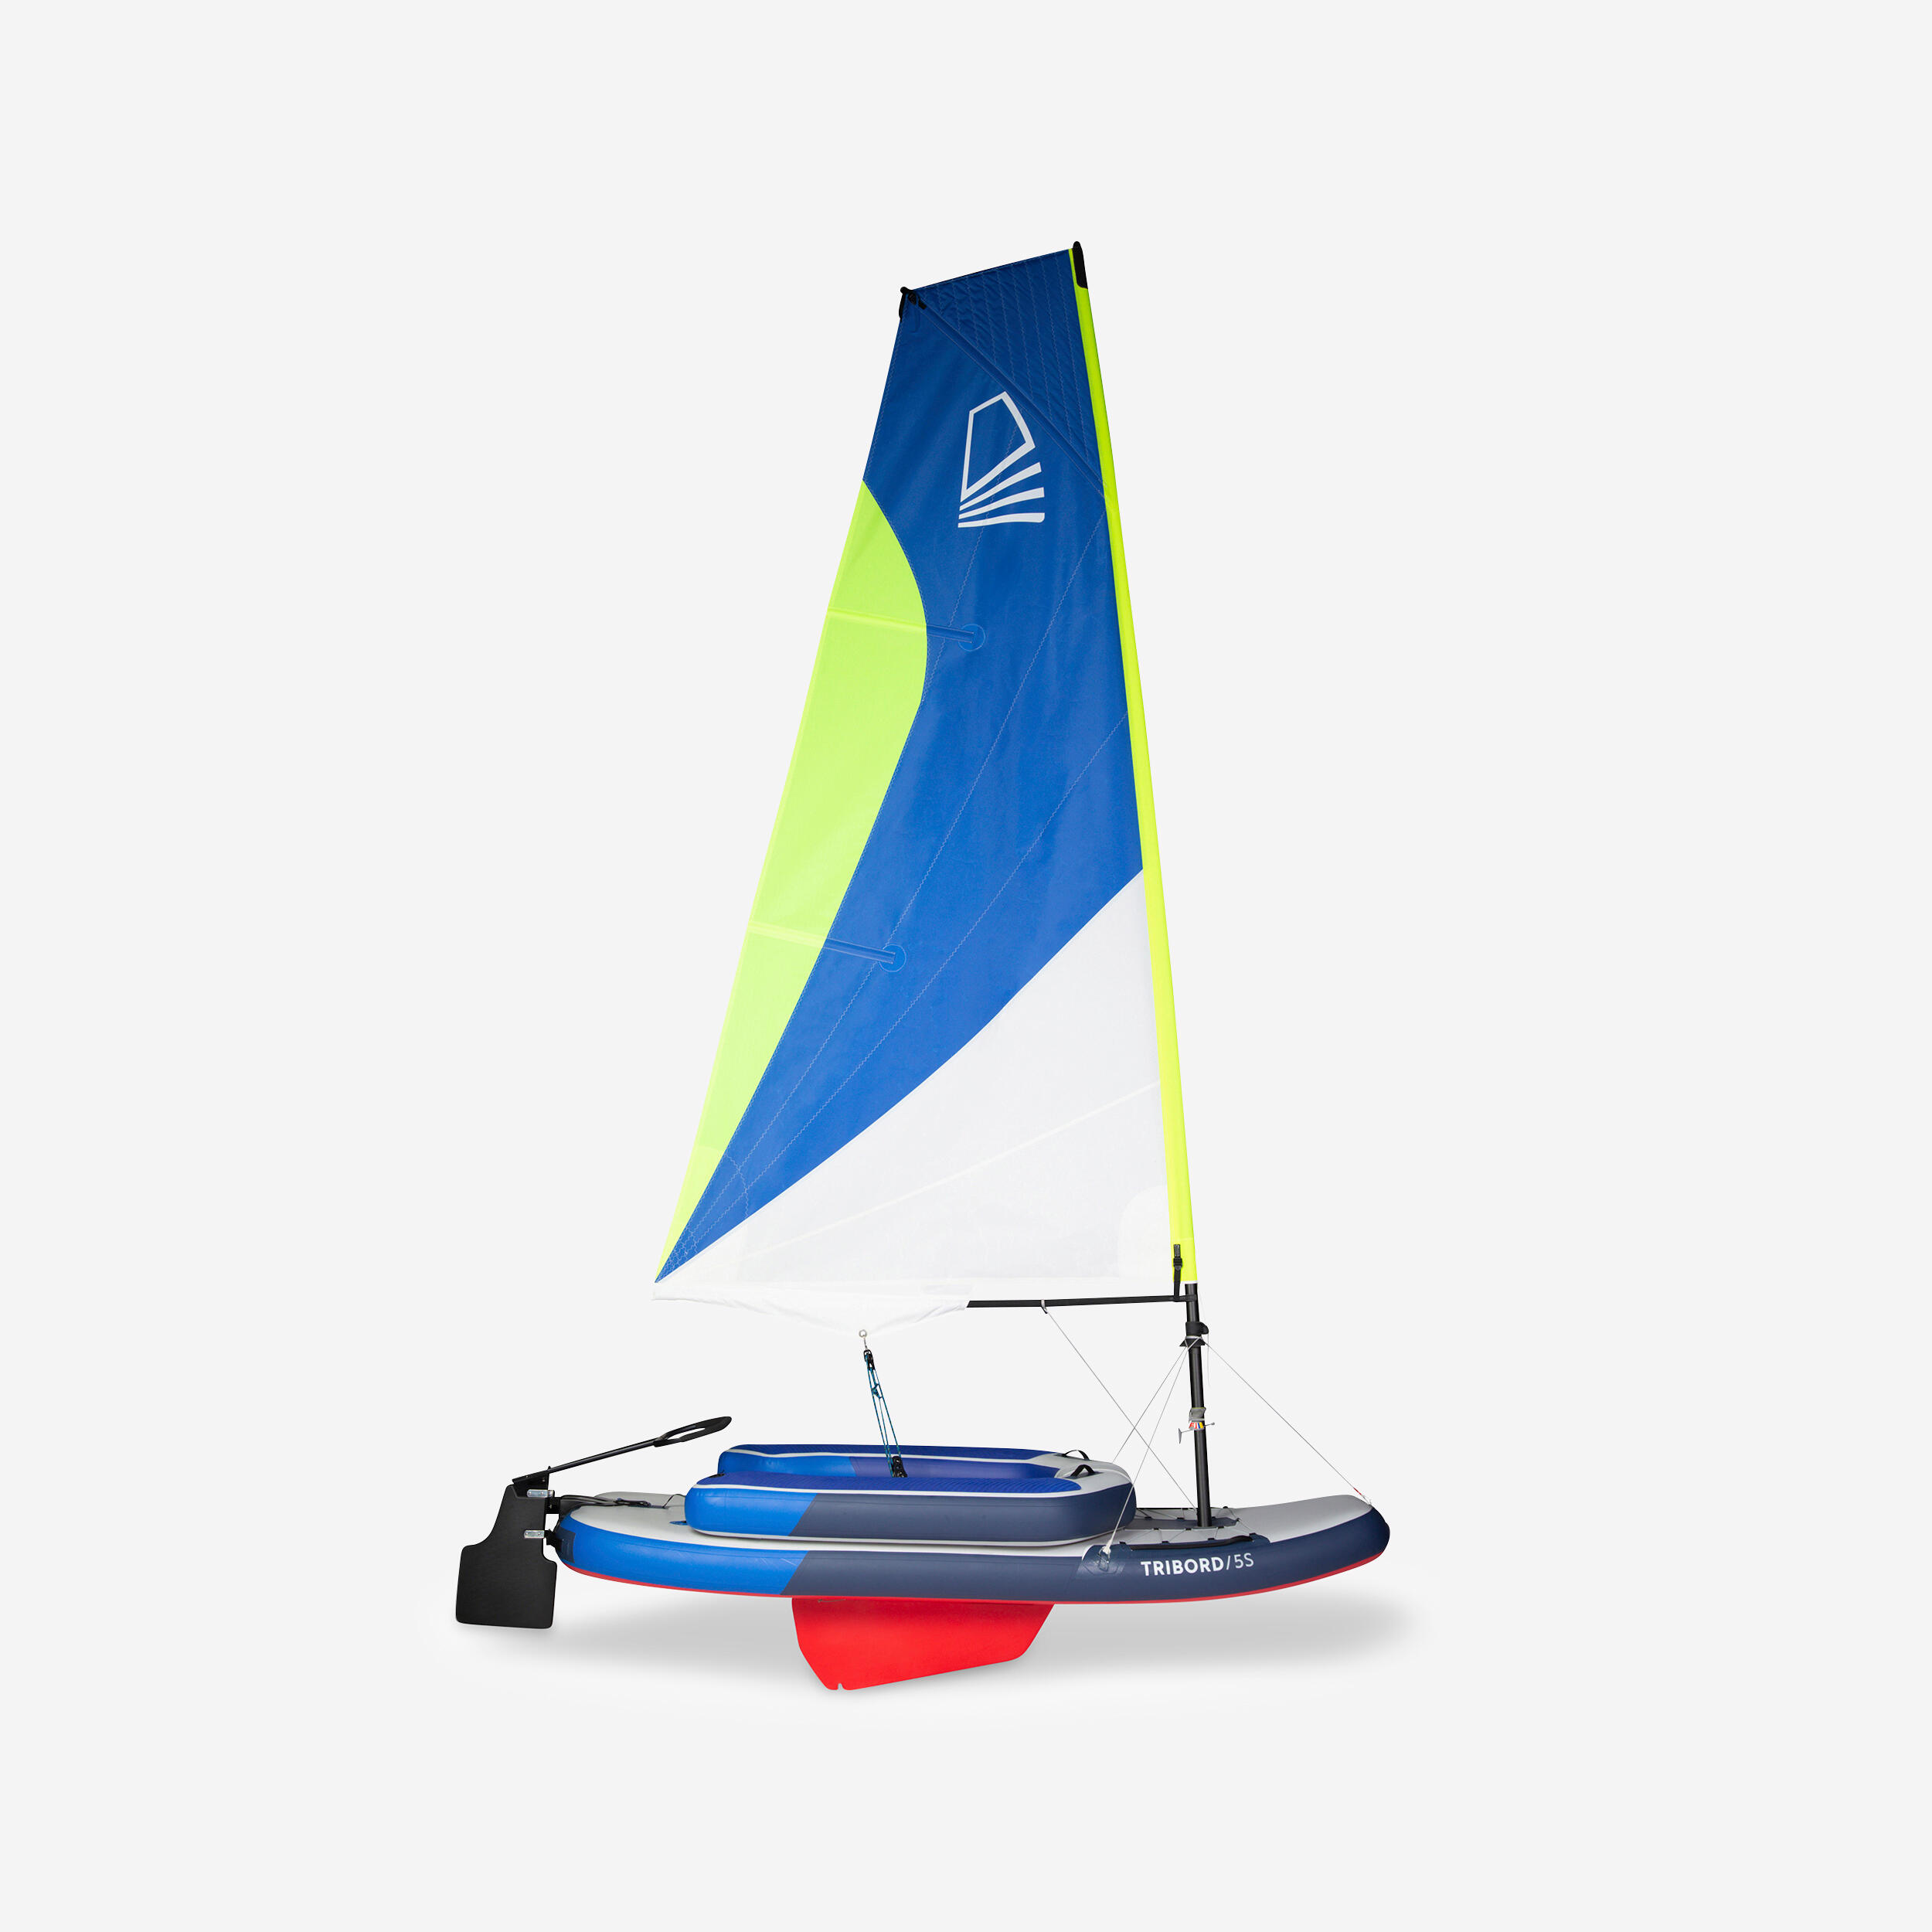 Inflatable sailing dinghy Tribord 5S 1/13